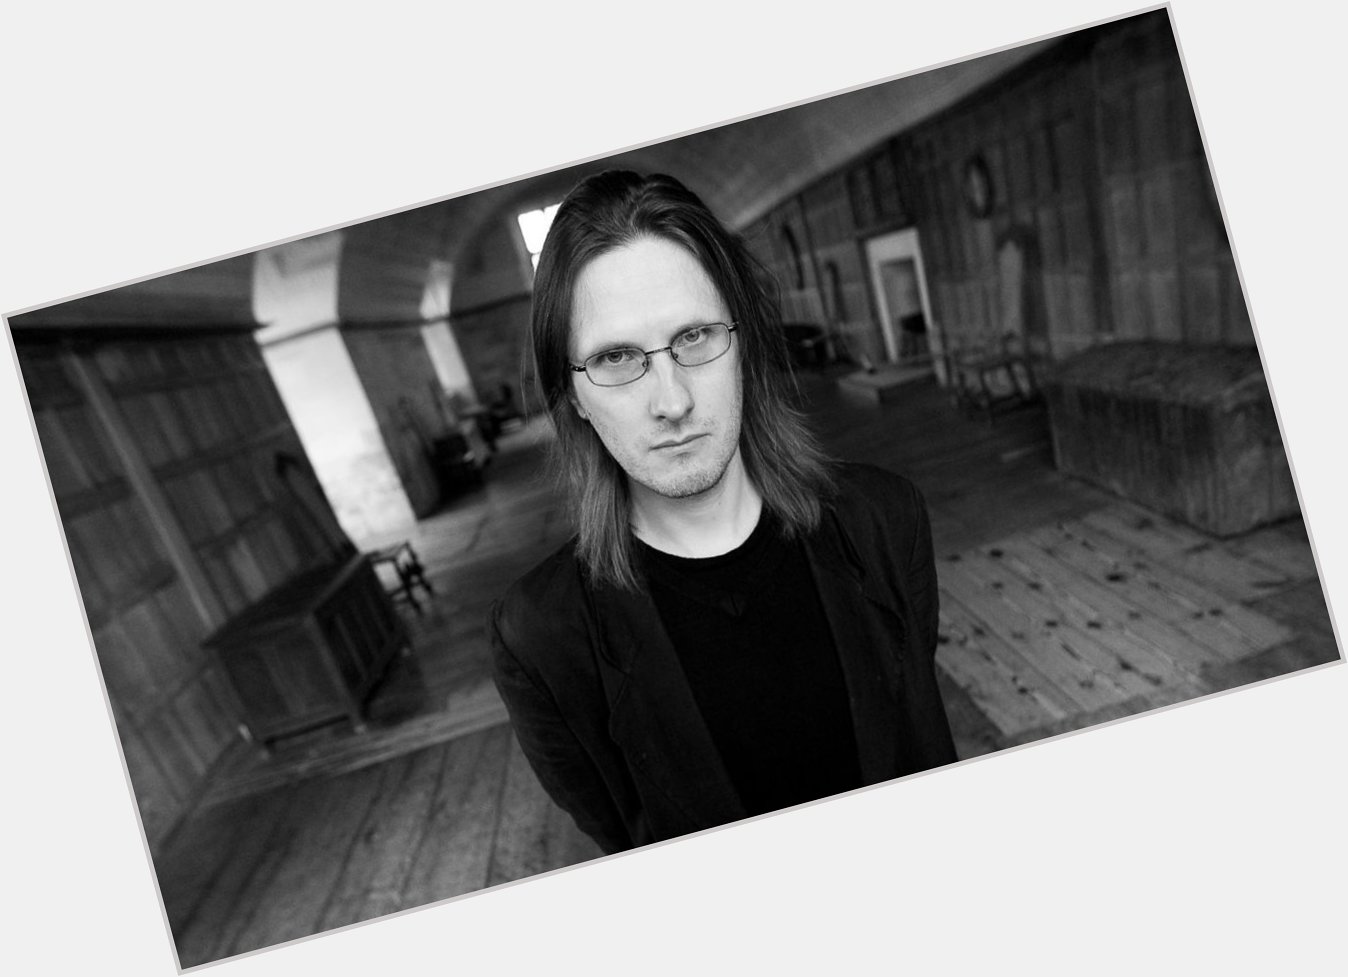 Happy birthday to Steven Wilson, who is 50 today! 